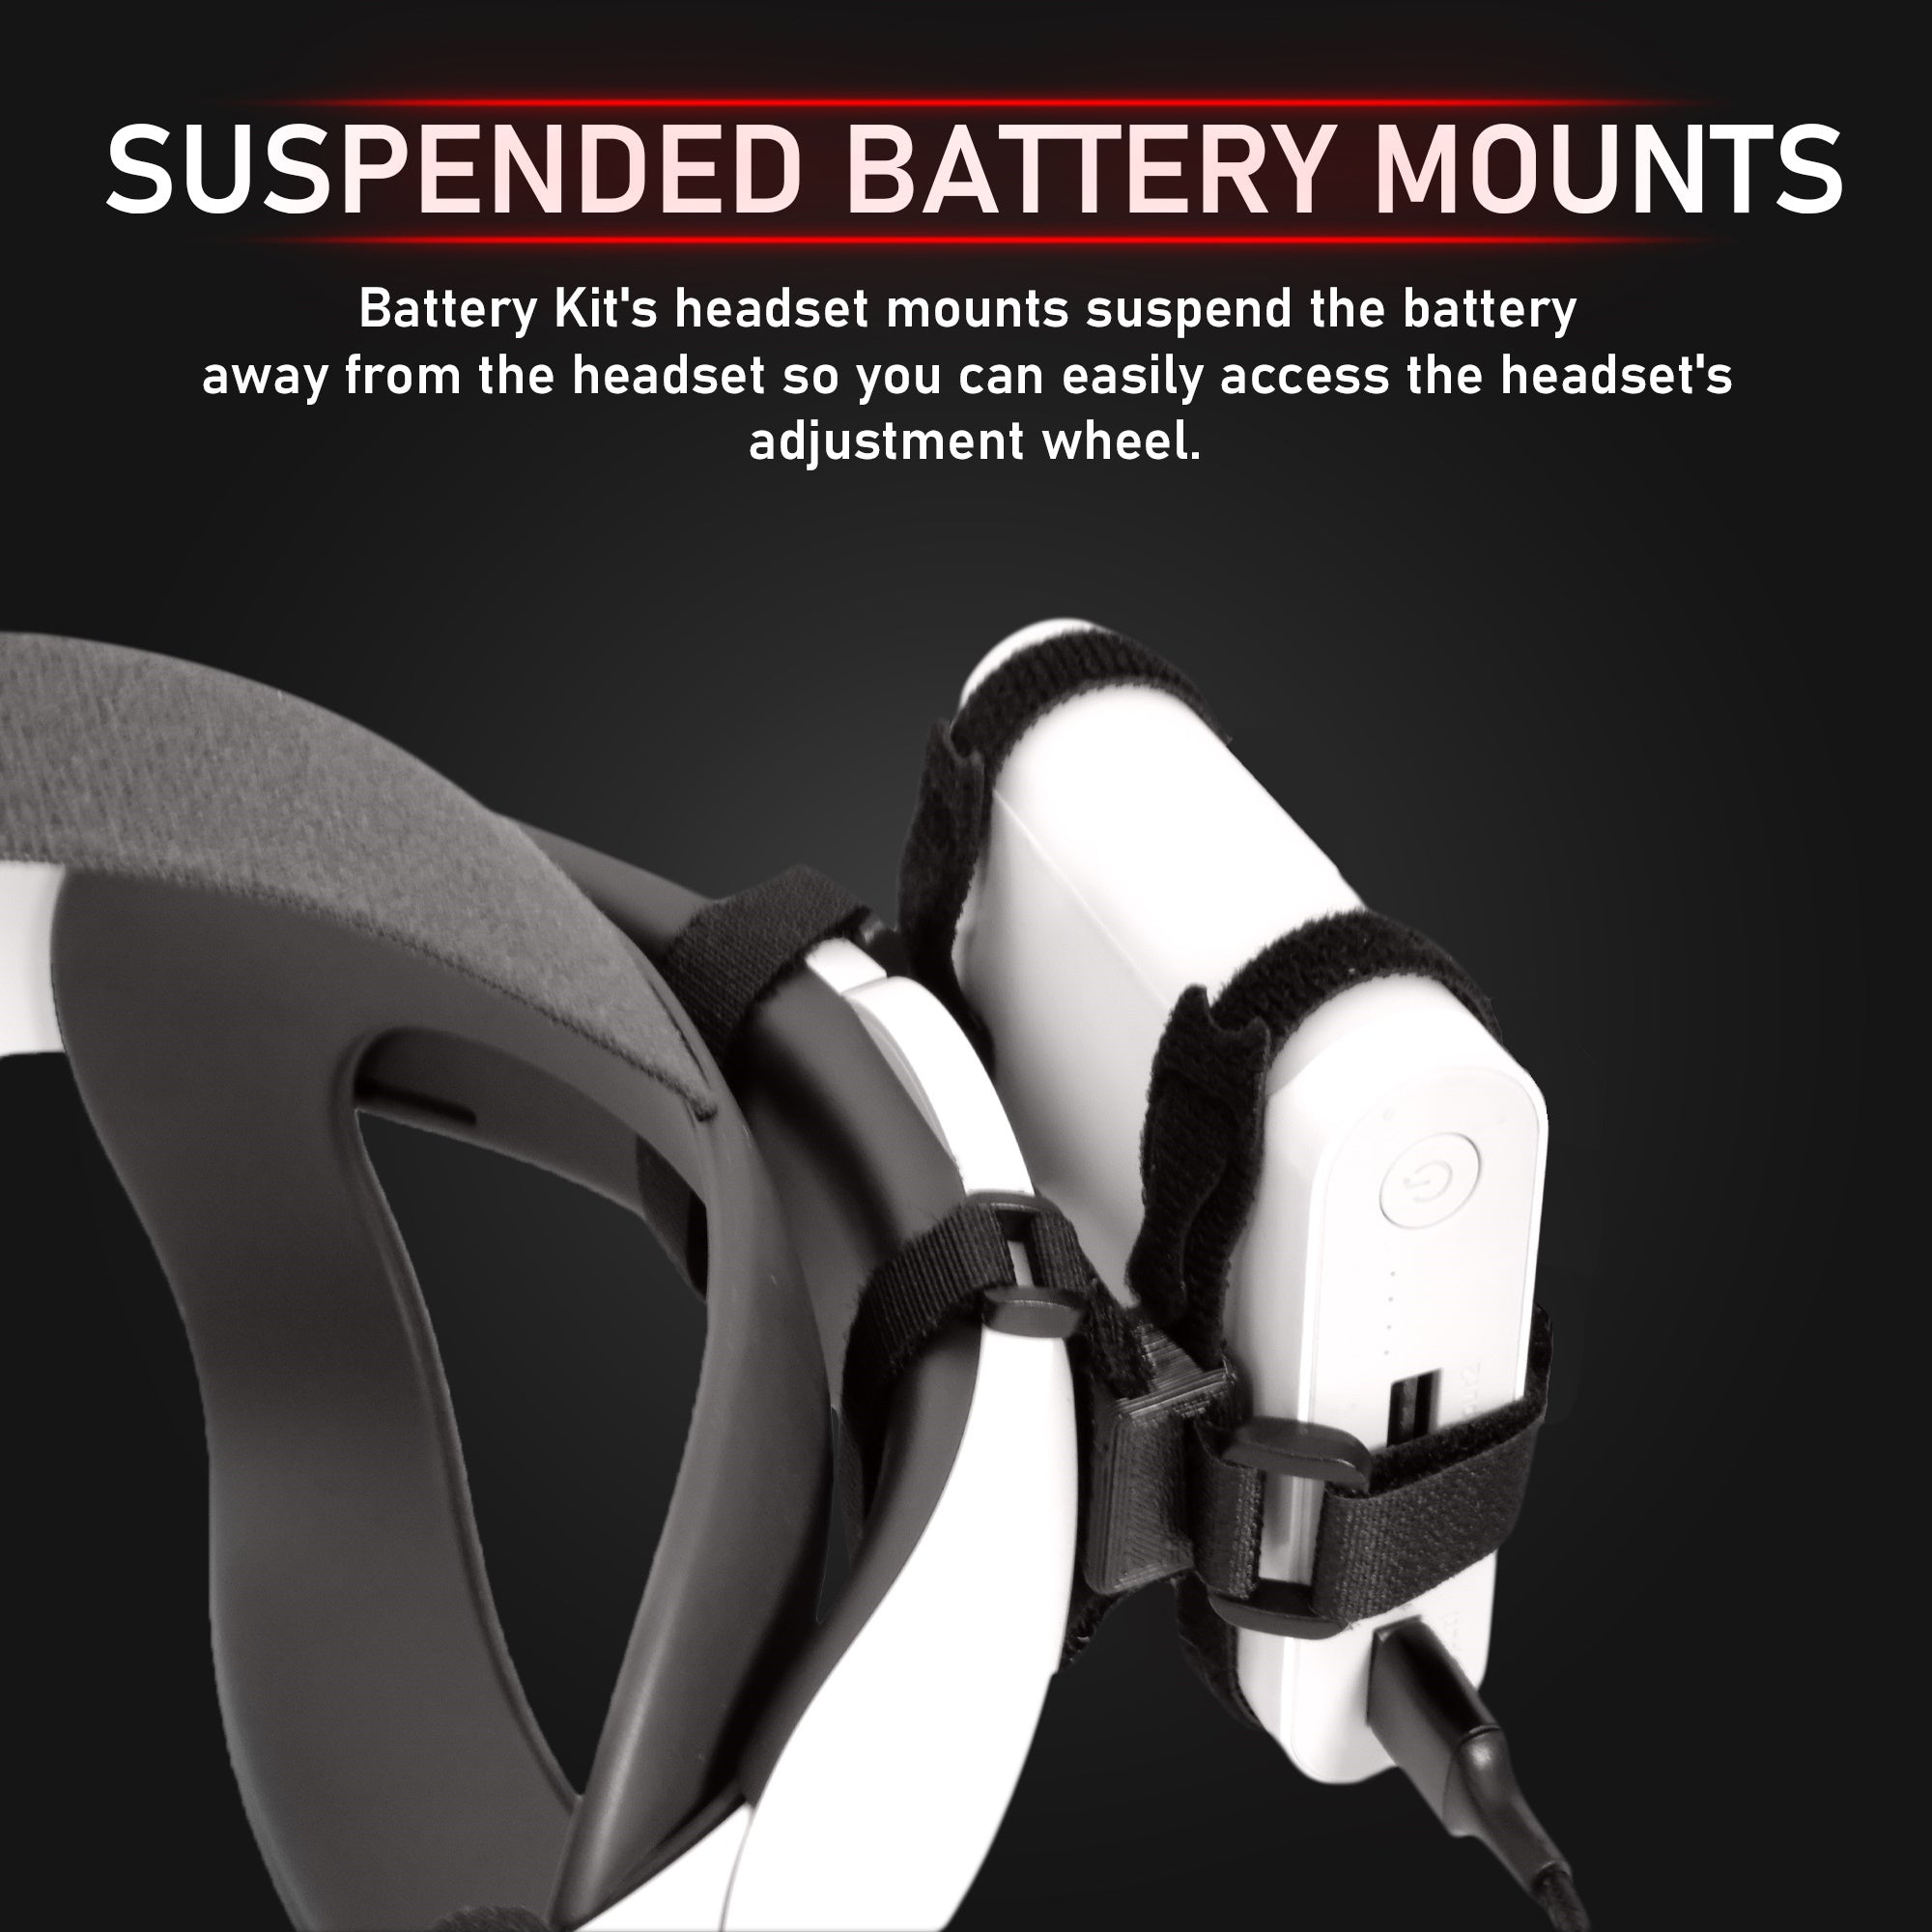 Suspended Battery Mounts. Battery Kit's headset mounts suspend the battery away from the headset so you can easily access the headset's adjsutment wheel 